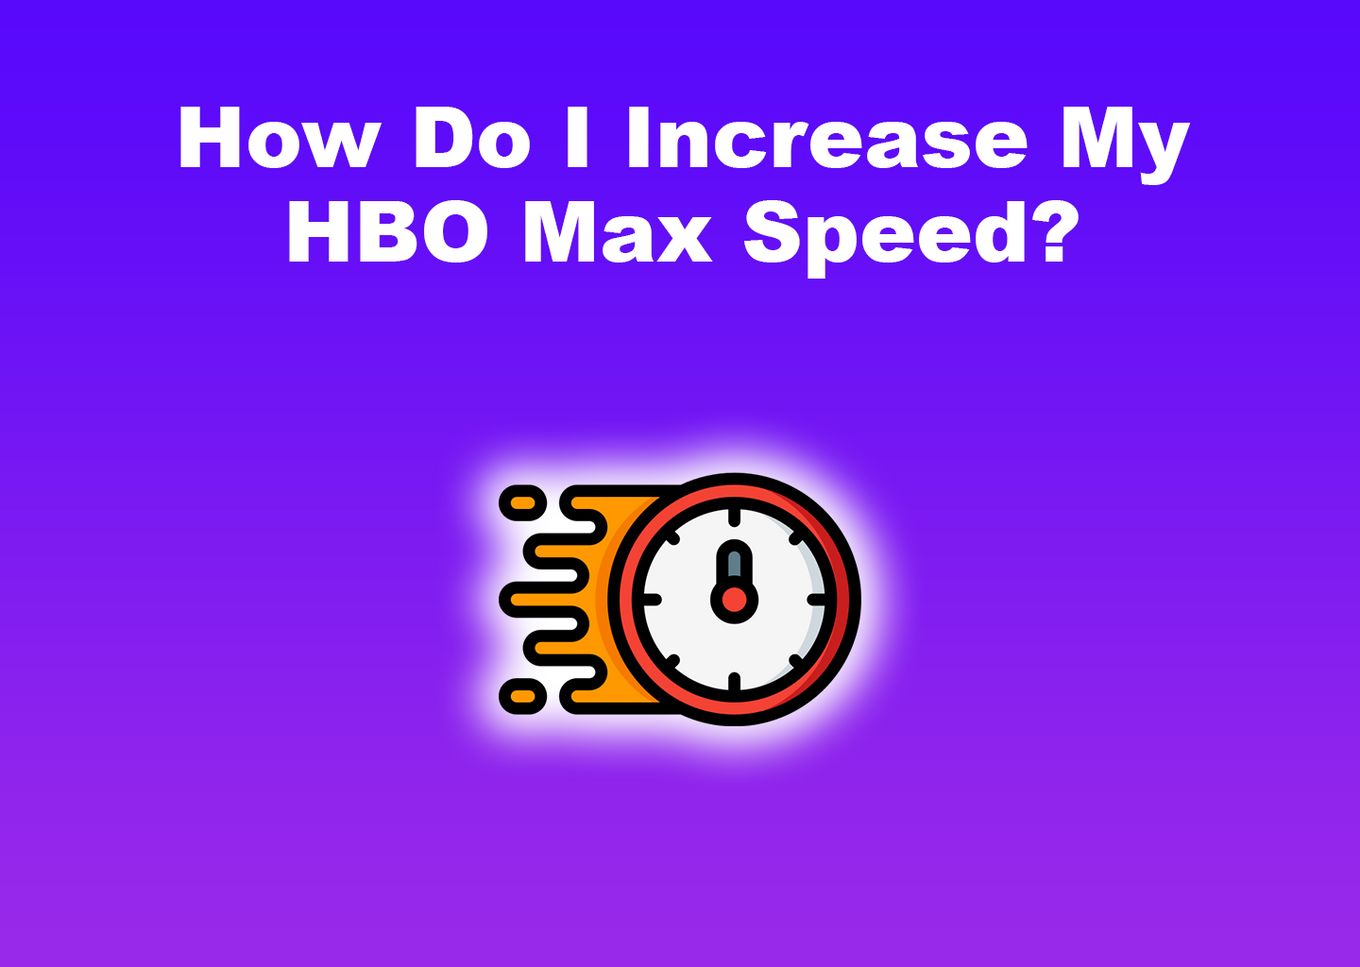 HBO Max Playback Speed